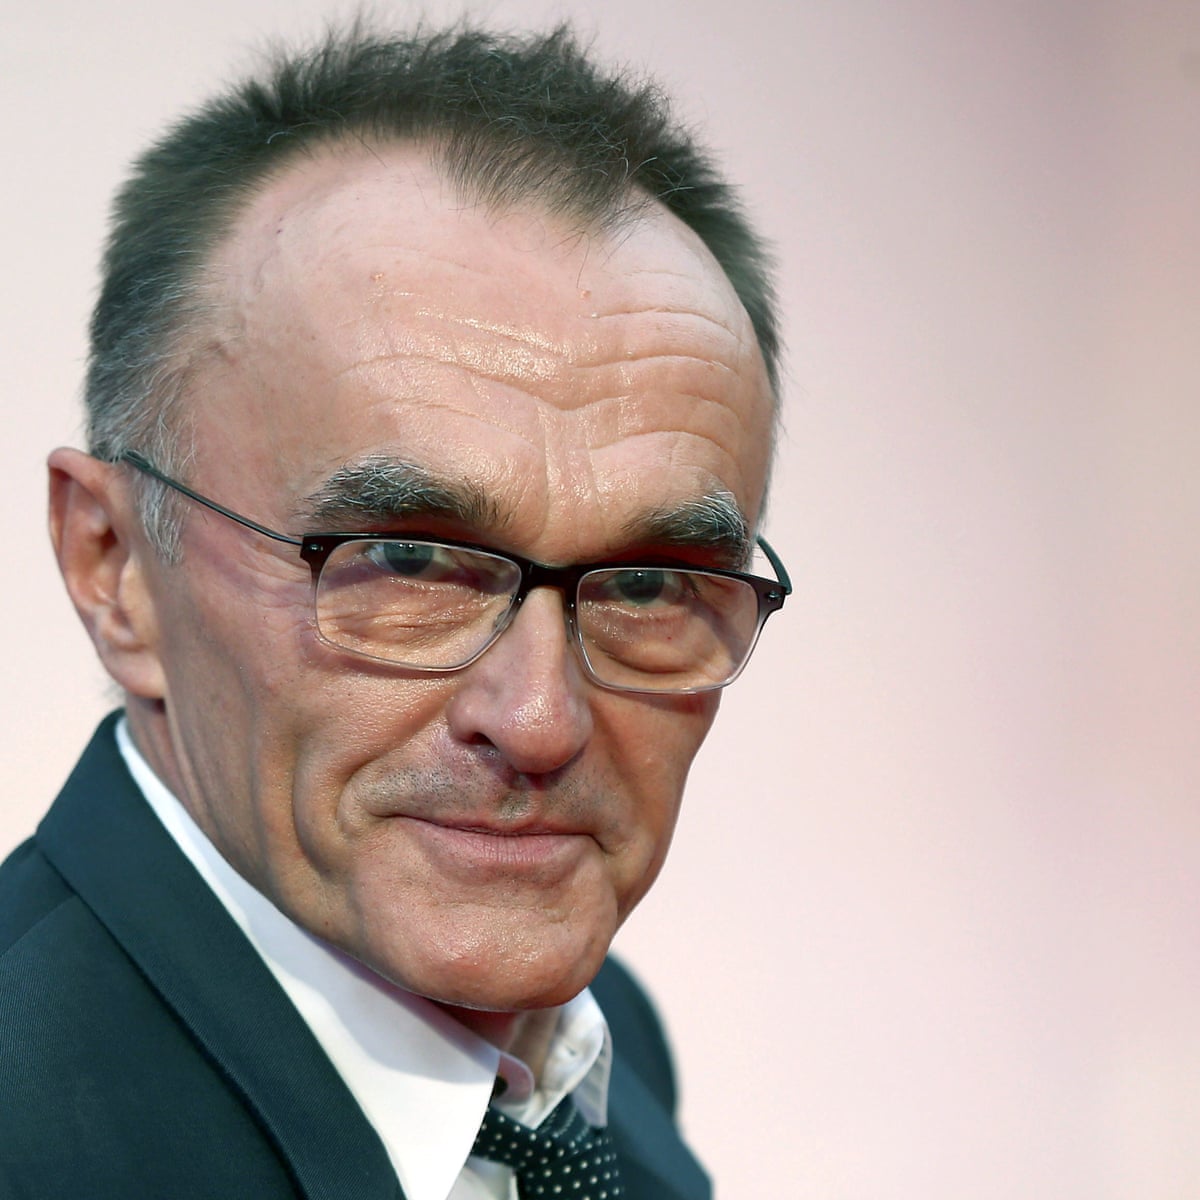 Danny Boyle's exit from James Bond throws franchise into chaos | James Bond  | The Guardian